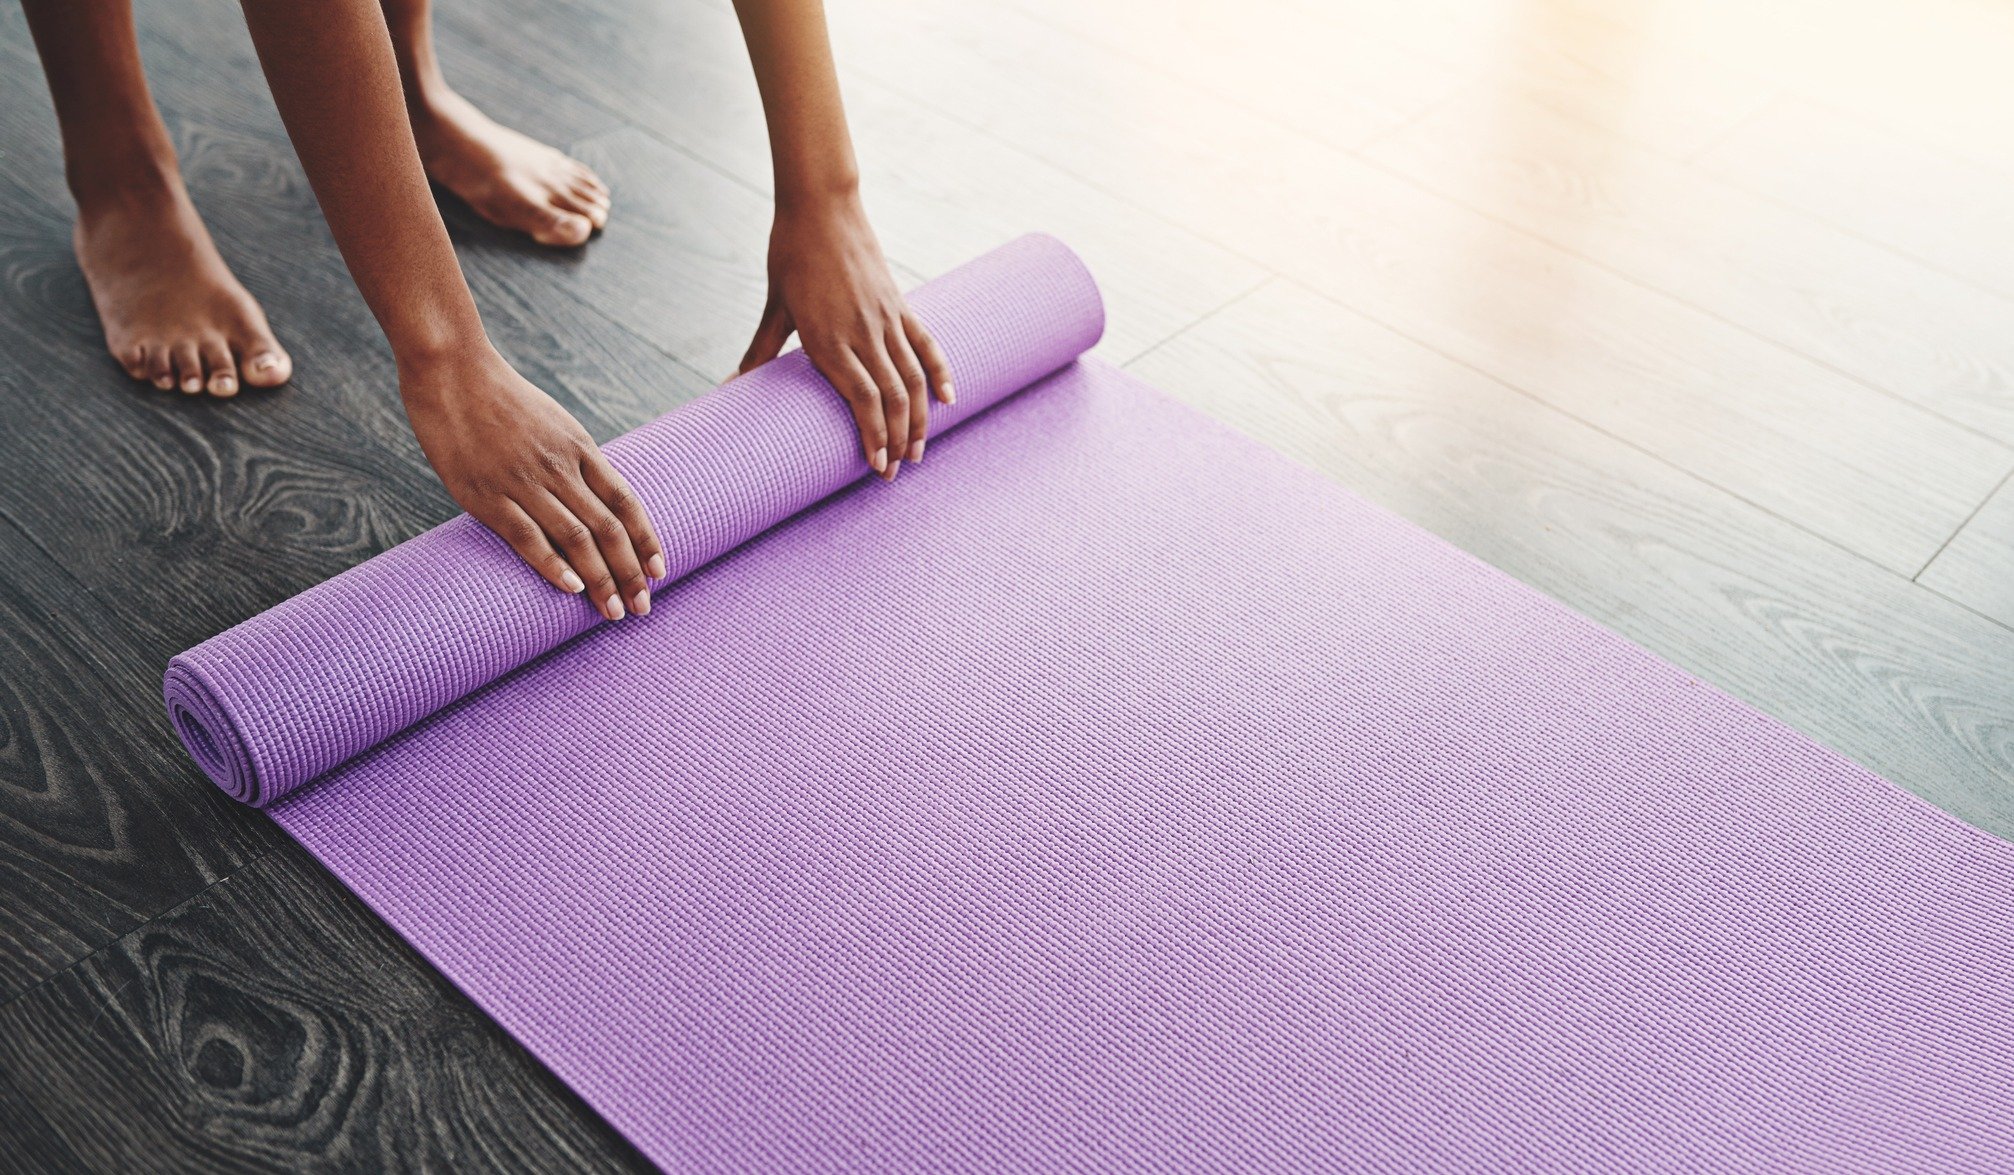 5 of the Best Yoga Poses for Menstrual Cramps